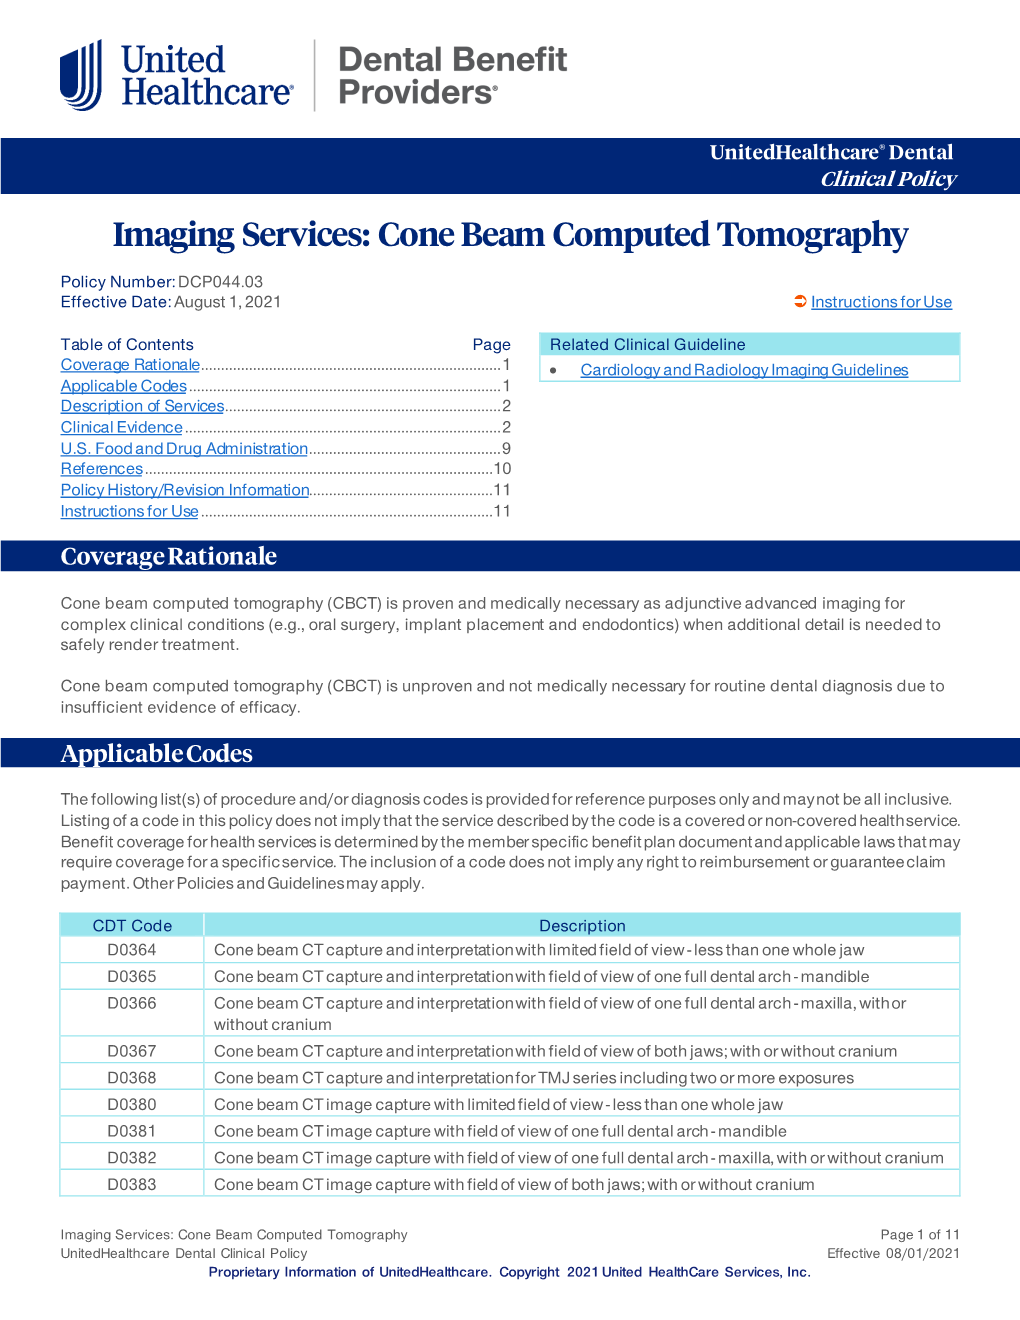 Imaging Services: Cone Beam Computed Tomography